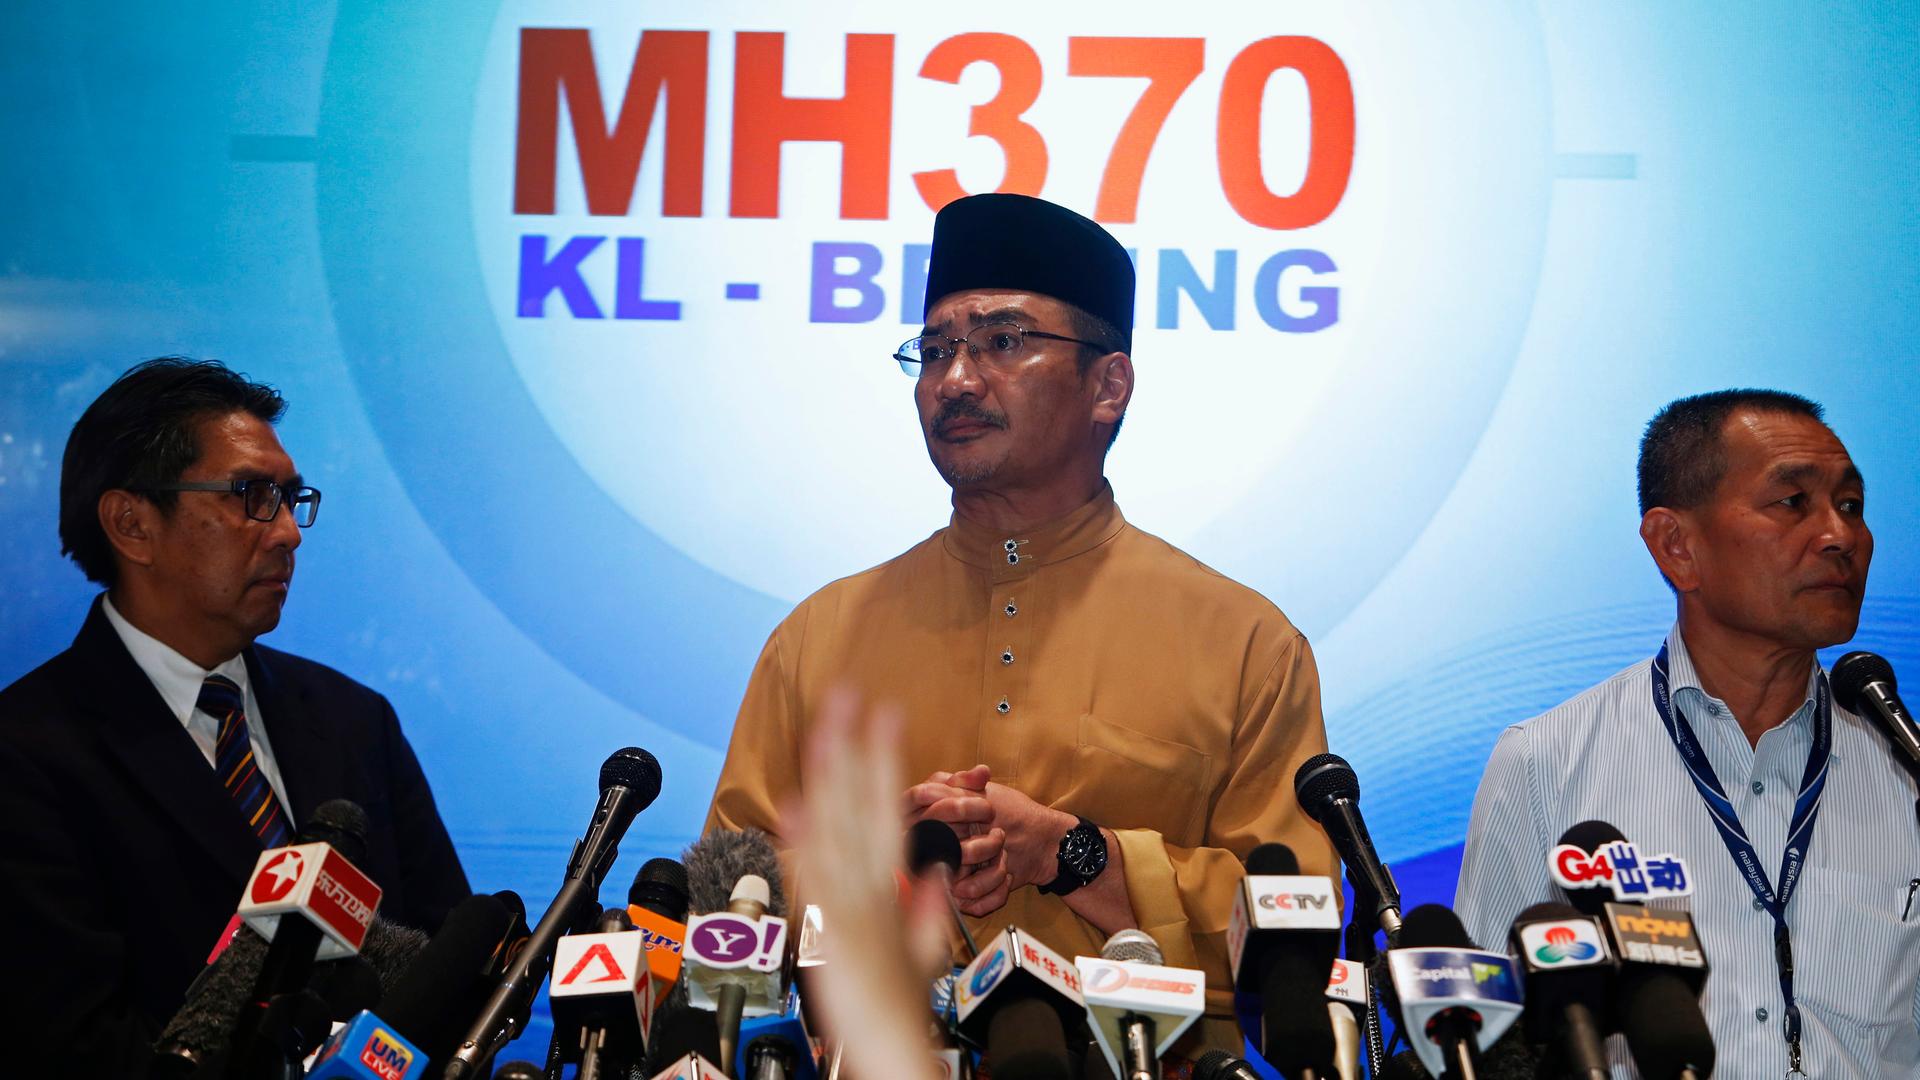 Malaysia's acting Transport Minister, Hishammuddin Tun Hussein, takes questions from journalists during a news conference about the missing Malaysia Airlines flight MH370.